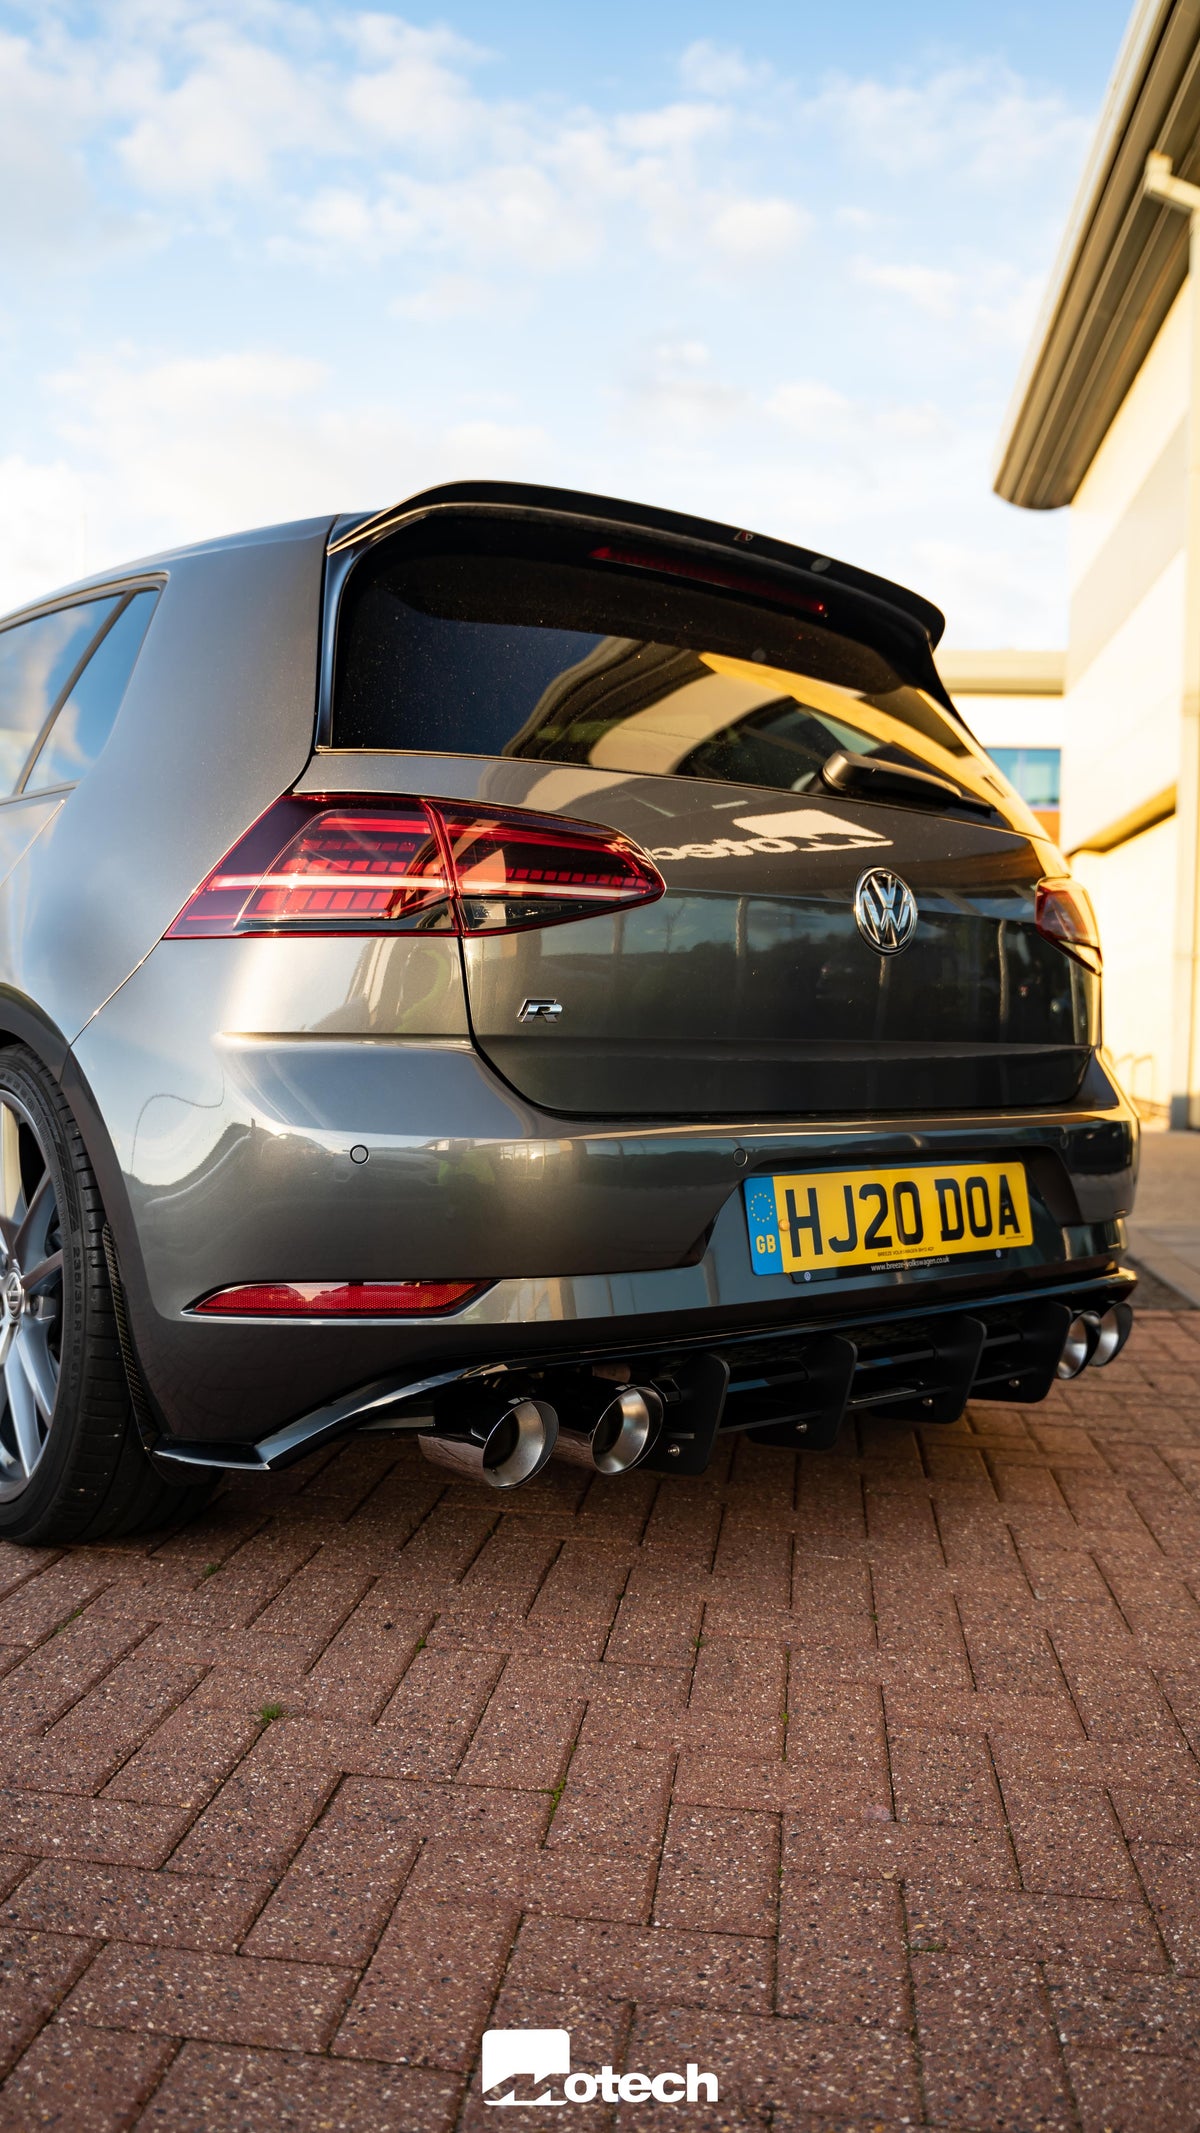 VW Golf R MK 7.5 Remus Exhaust also cars with GPF